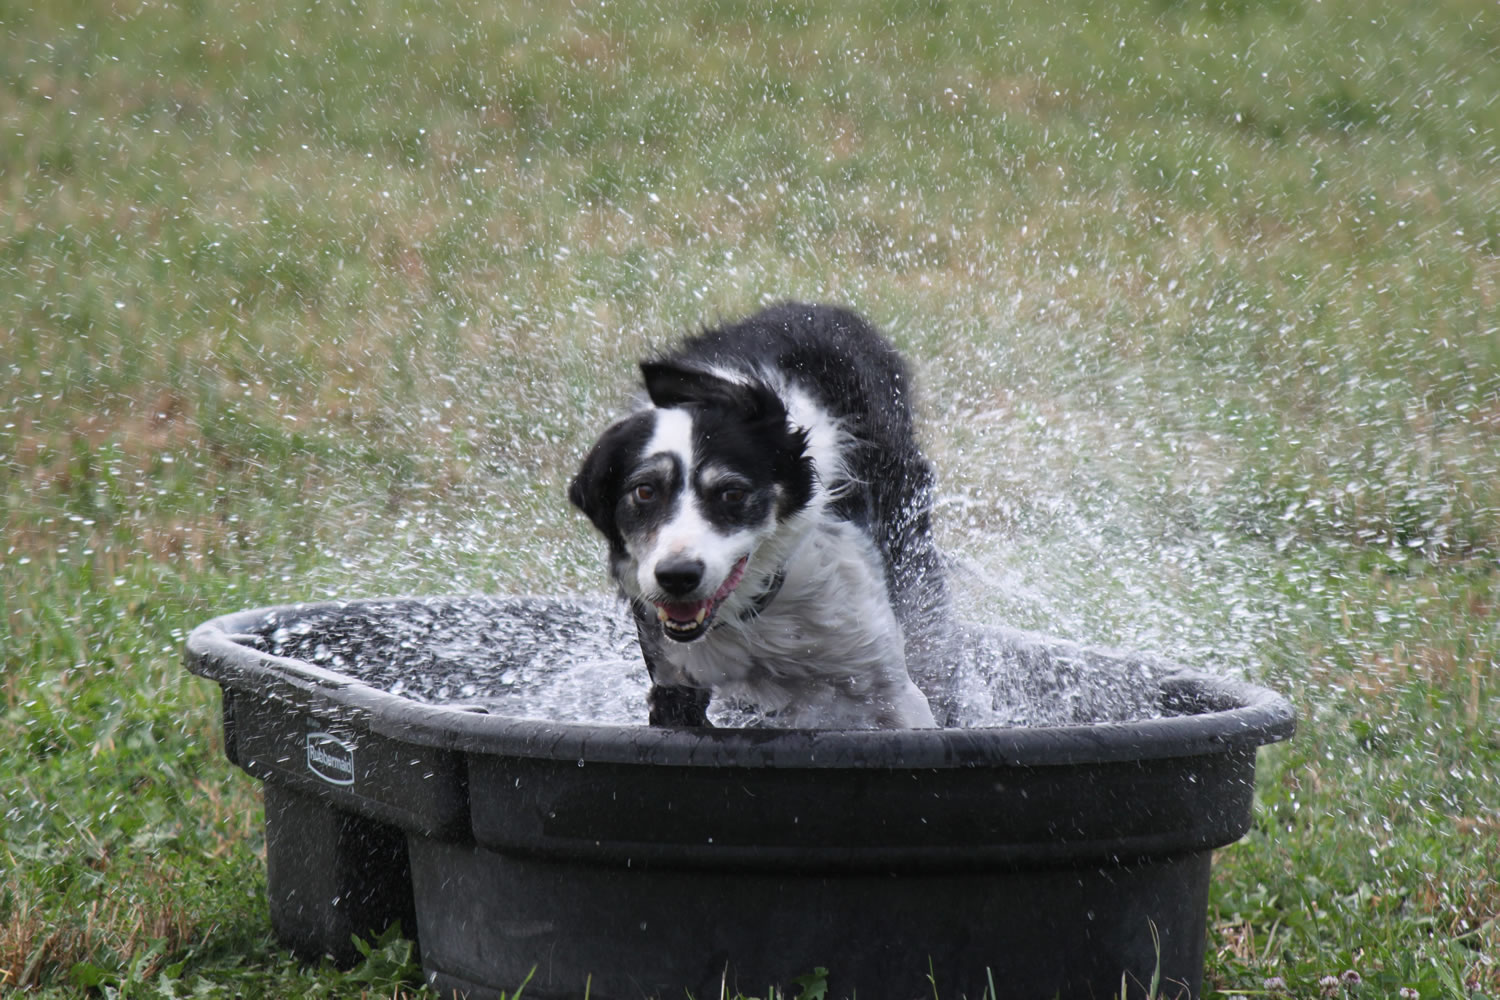 Butch, owned by Angie Untisz of Bend, Ore., cools off after competing in the open class round of the Lacamas Valley Sheepdog Trial at the Johnston Farm in Camas on Friday.